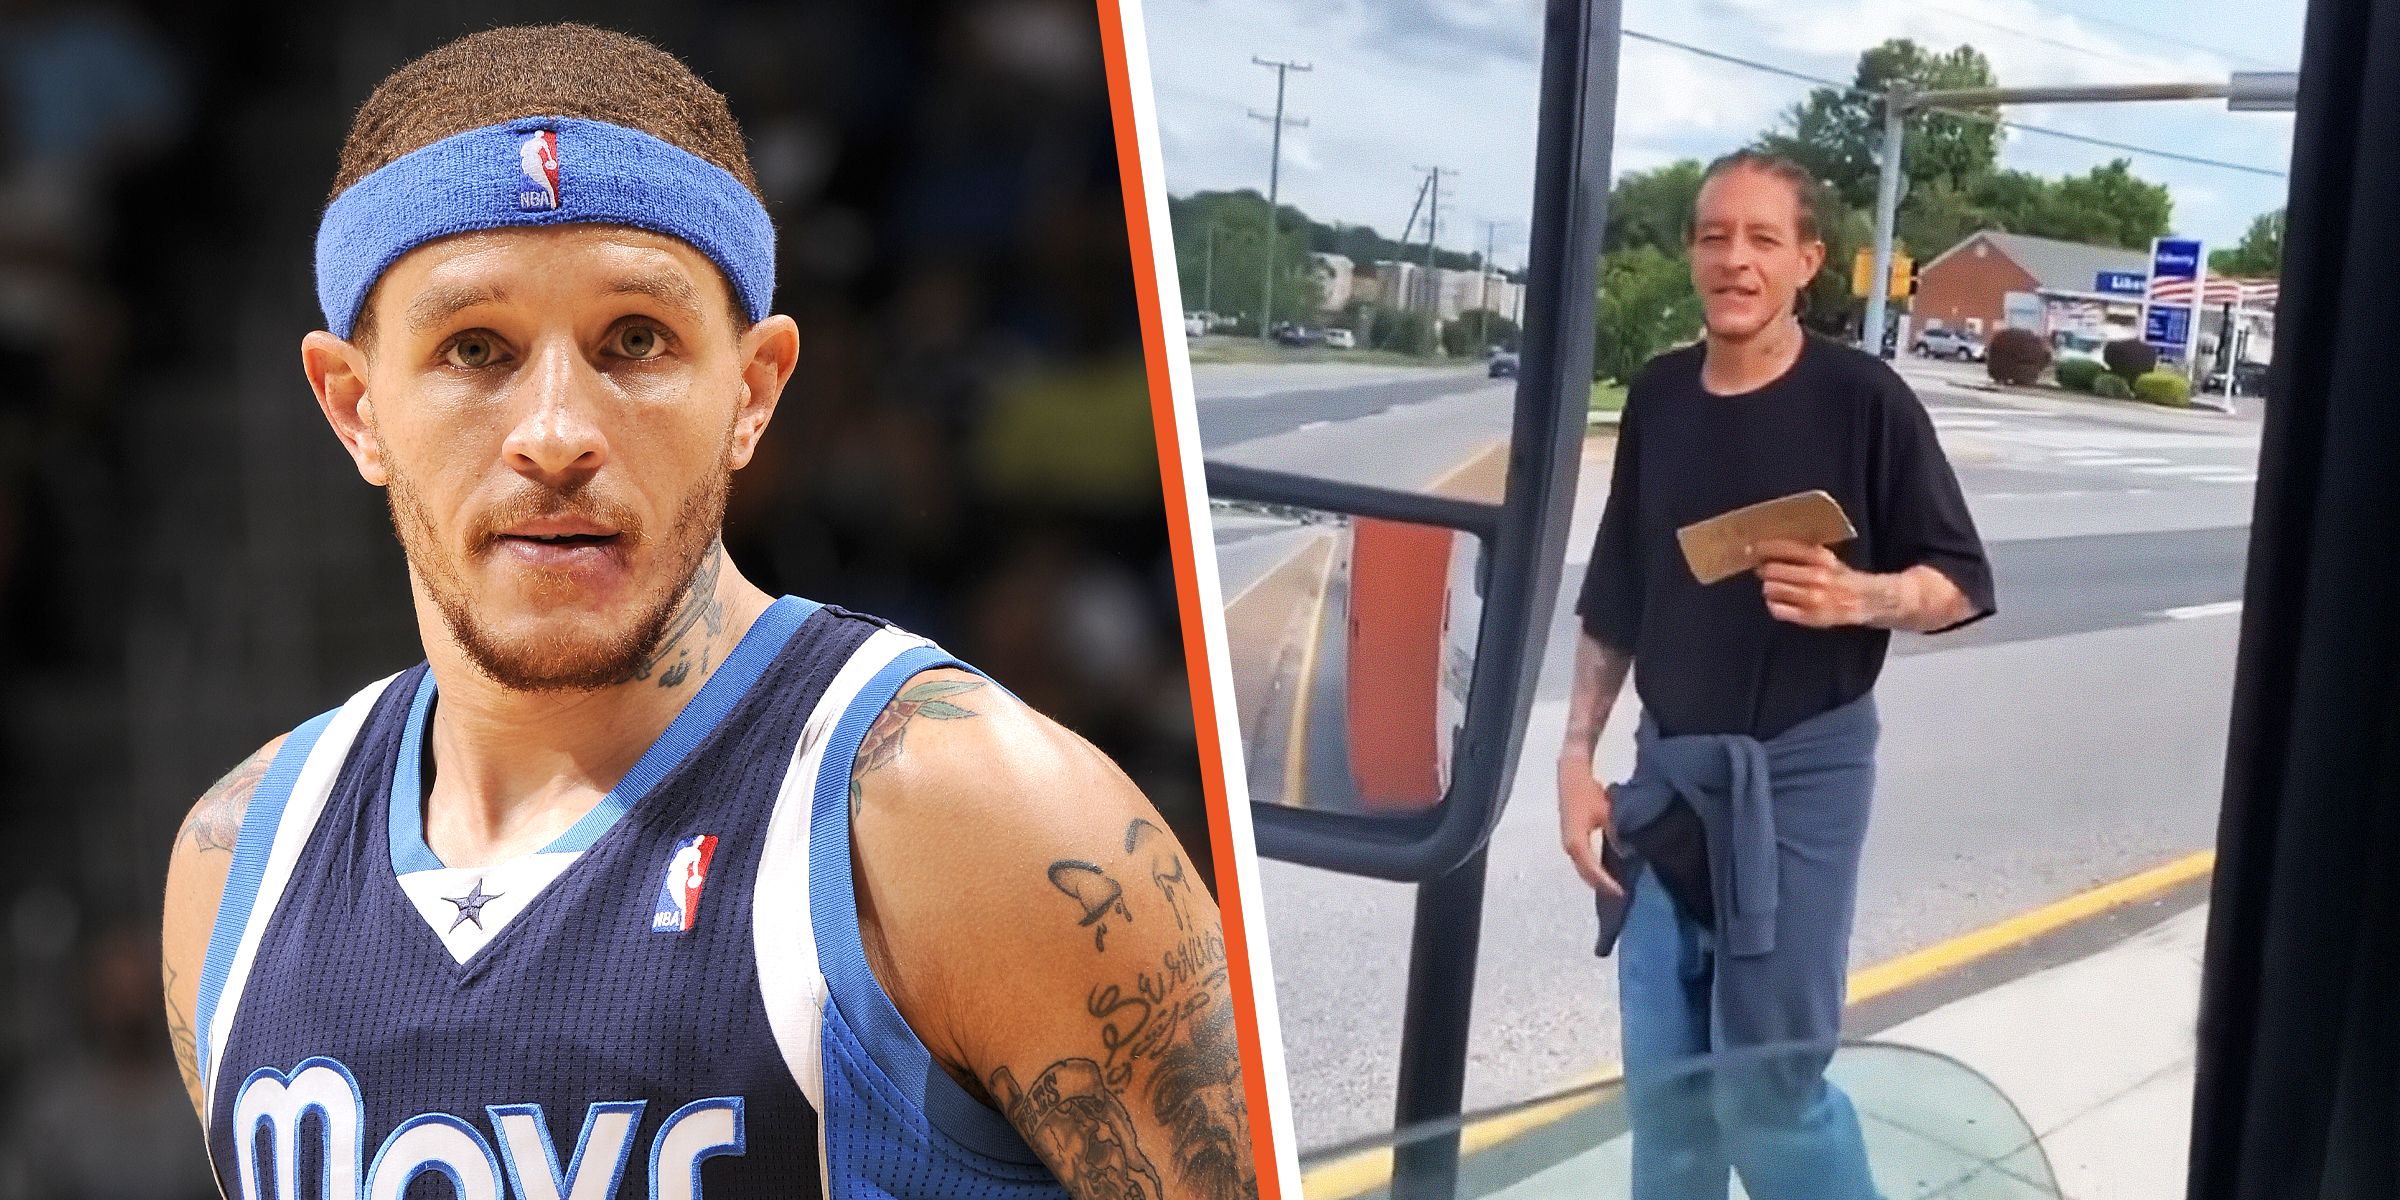 Delonte West | Delonte West | Source: youtube.com/@9MagTV | Getty Images